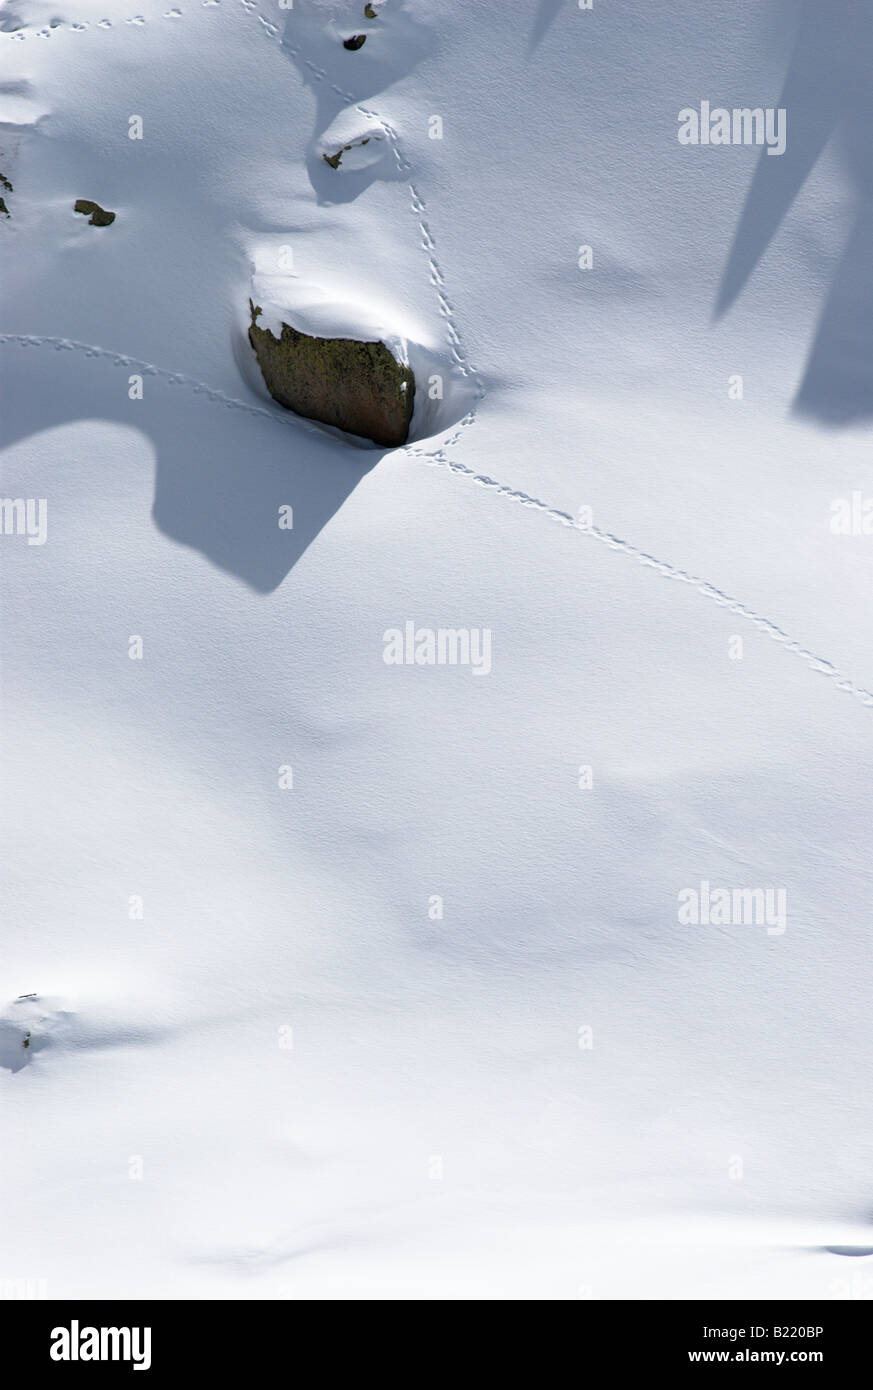 Rabbit tracks in fresh nicely textured snow surface Stock Photo